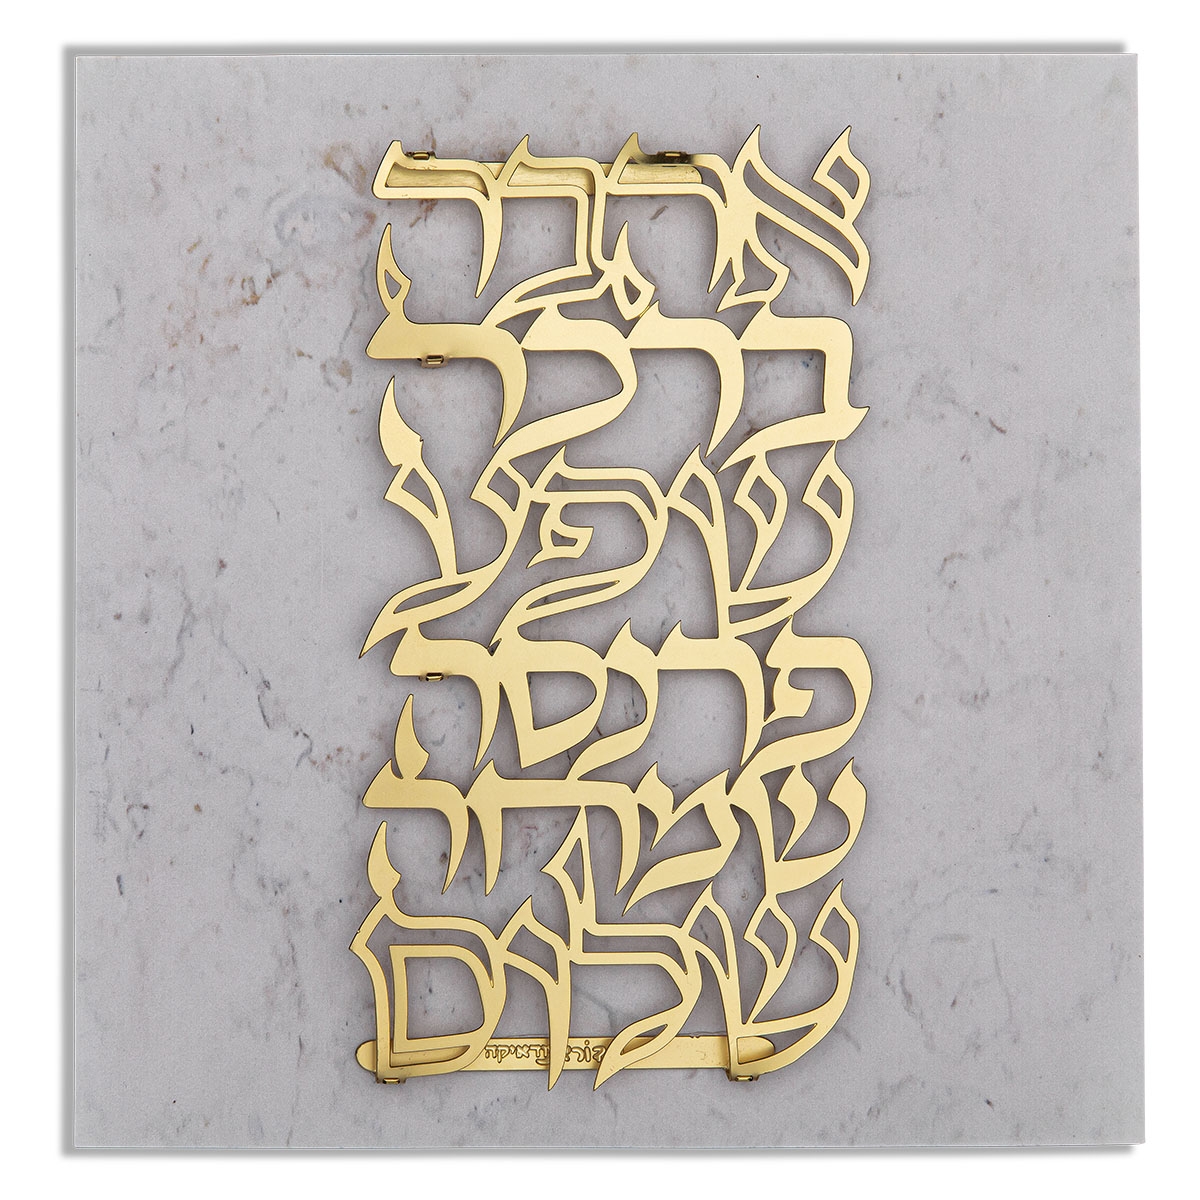 Designer Gold-Plated Floating Letters Wall Hanging – Blessings For The Home - 1